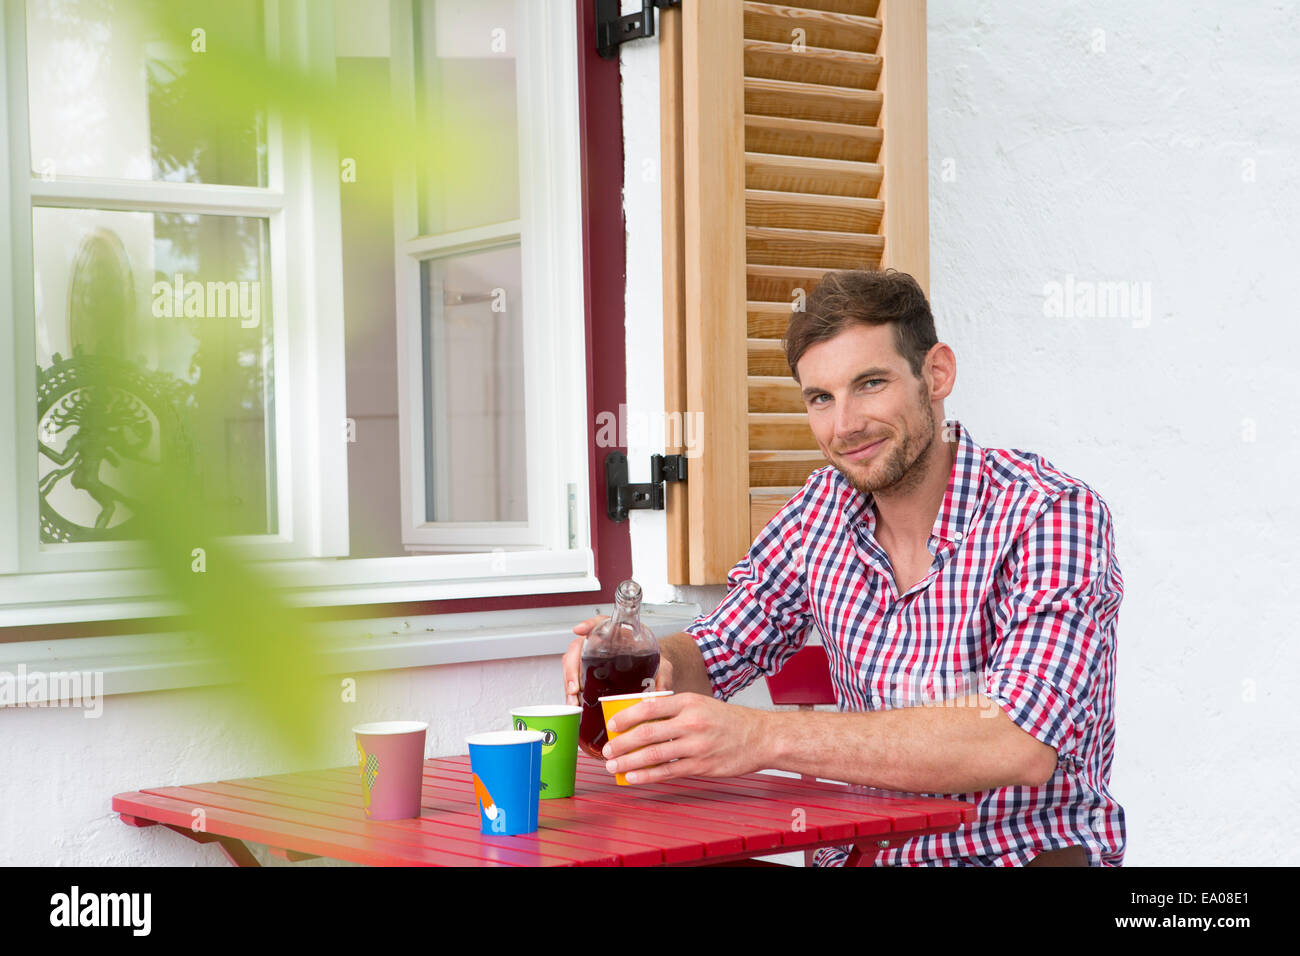 Mid adult man at table pouring soft drink Stock Photo